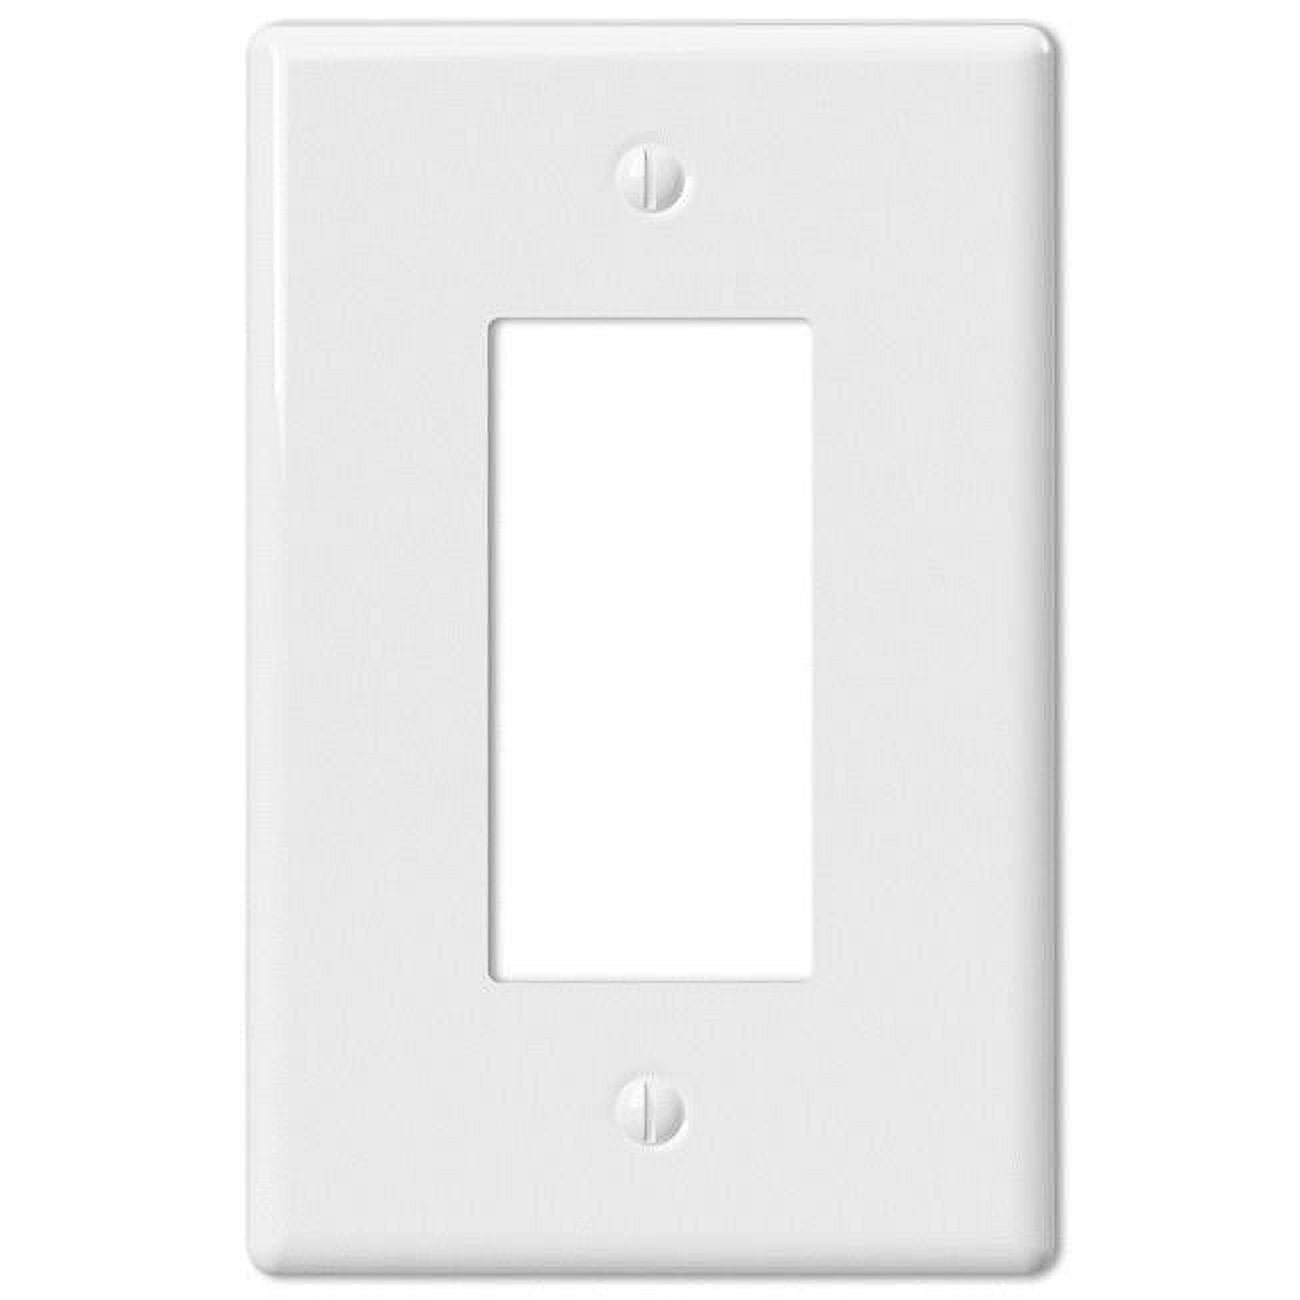 Picture of Amerelle 3003442 Metro White 1 Gang Ceramic Rocker Wall Plate